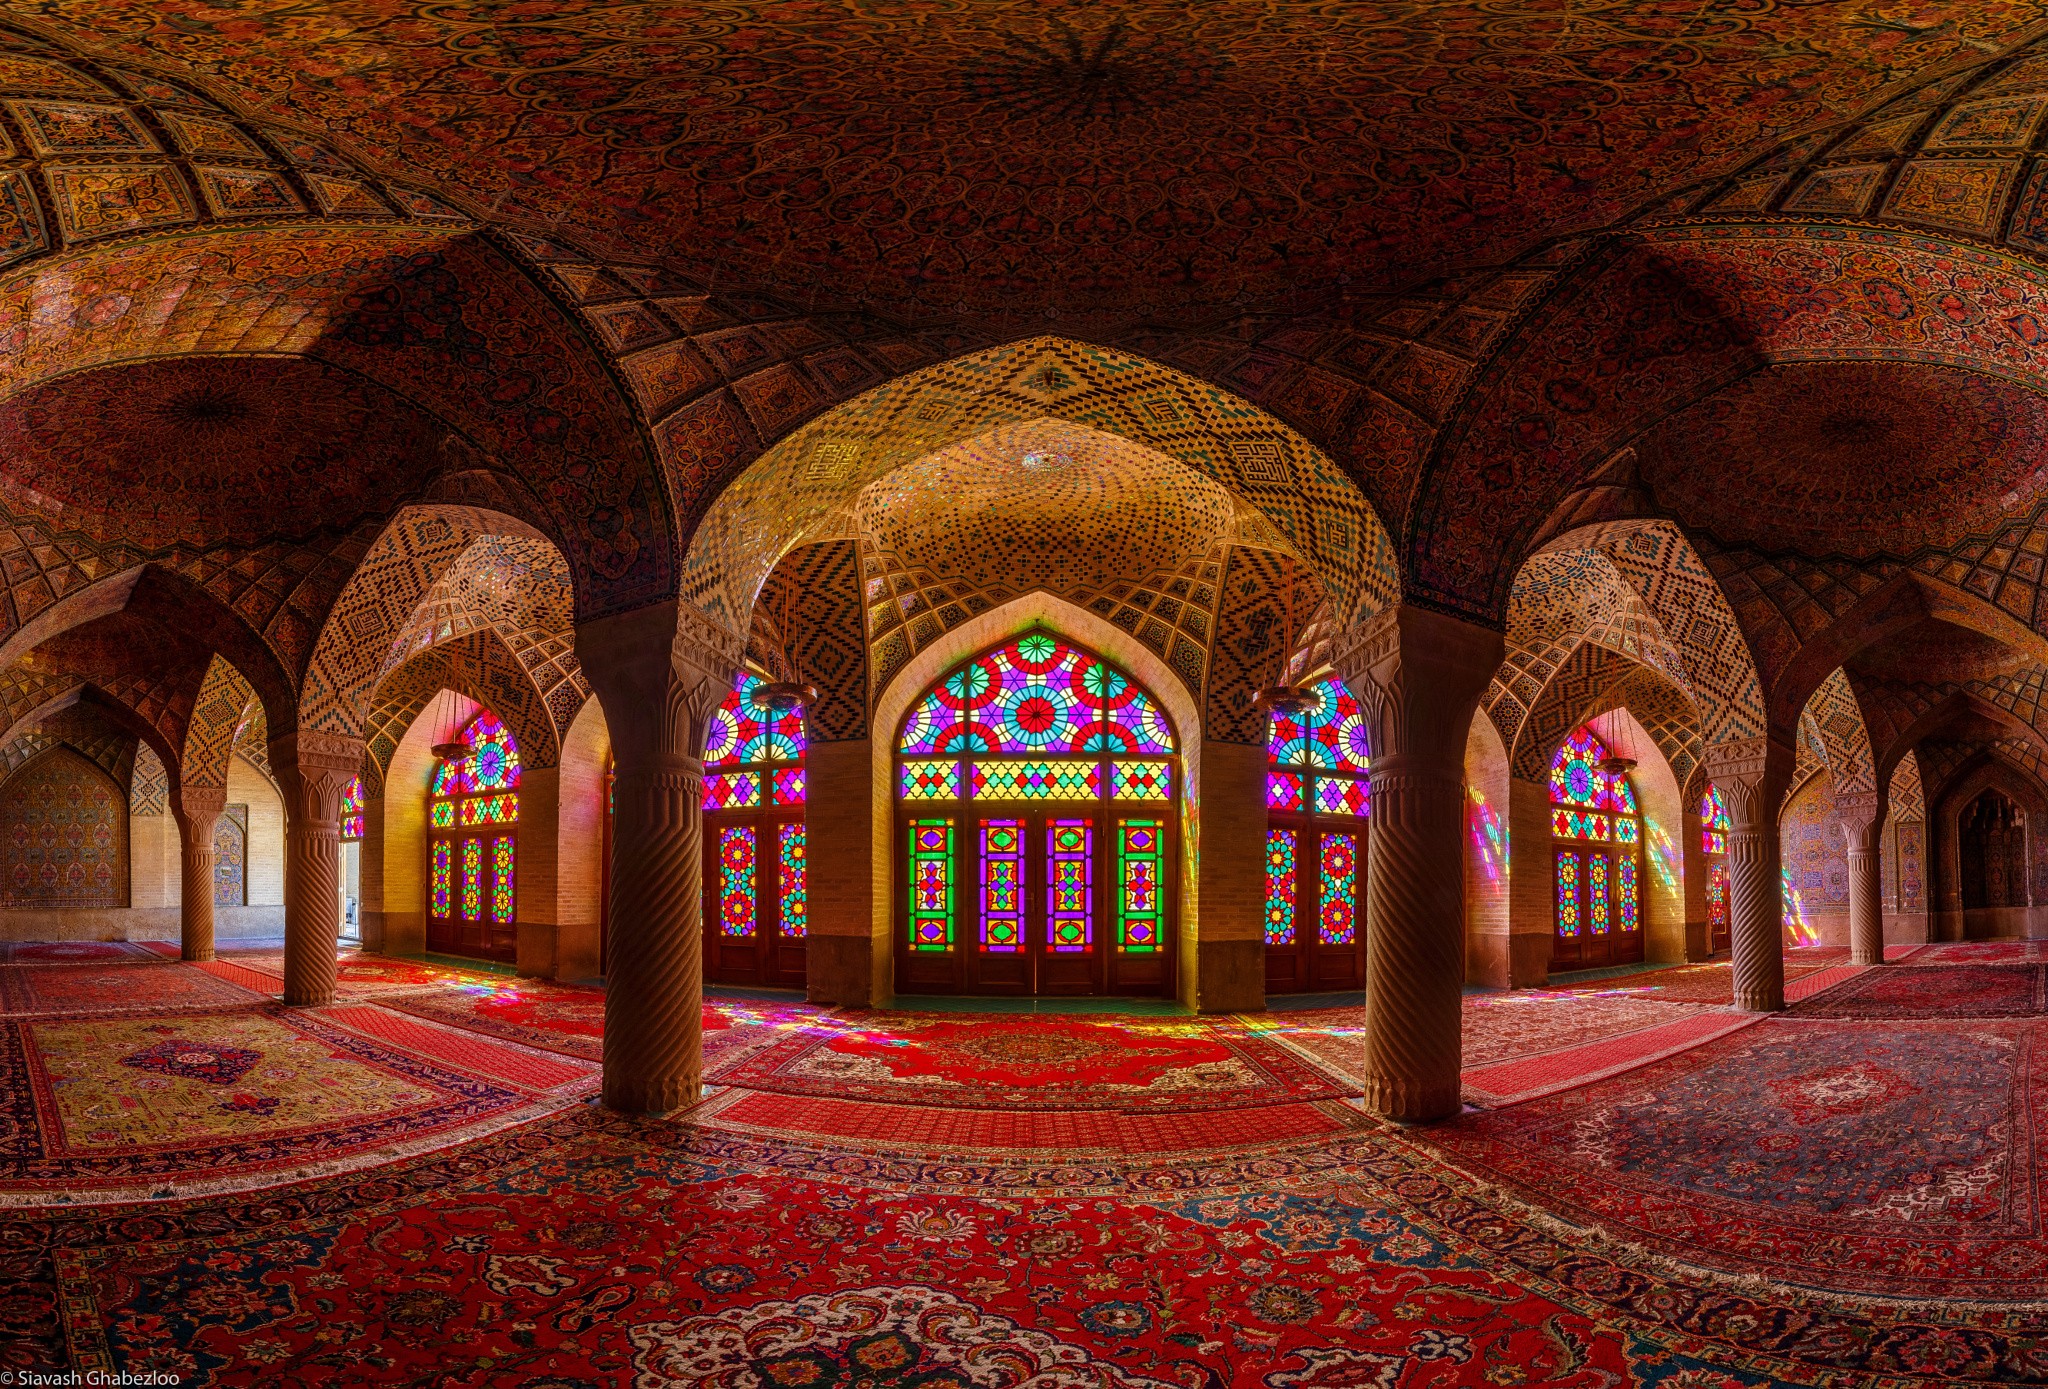 stained glass, iran, arch, mosques, religious, mosque, colorful, colors